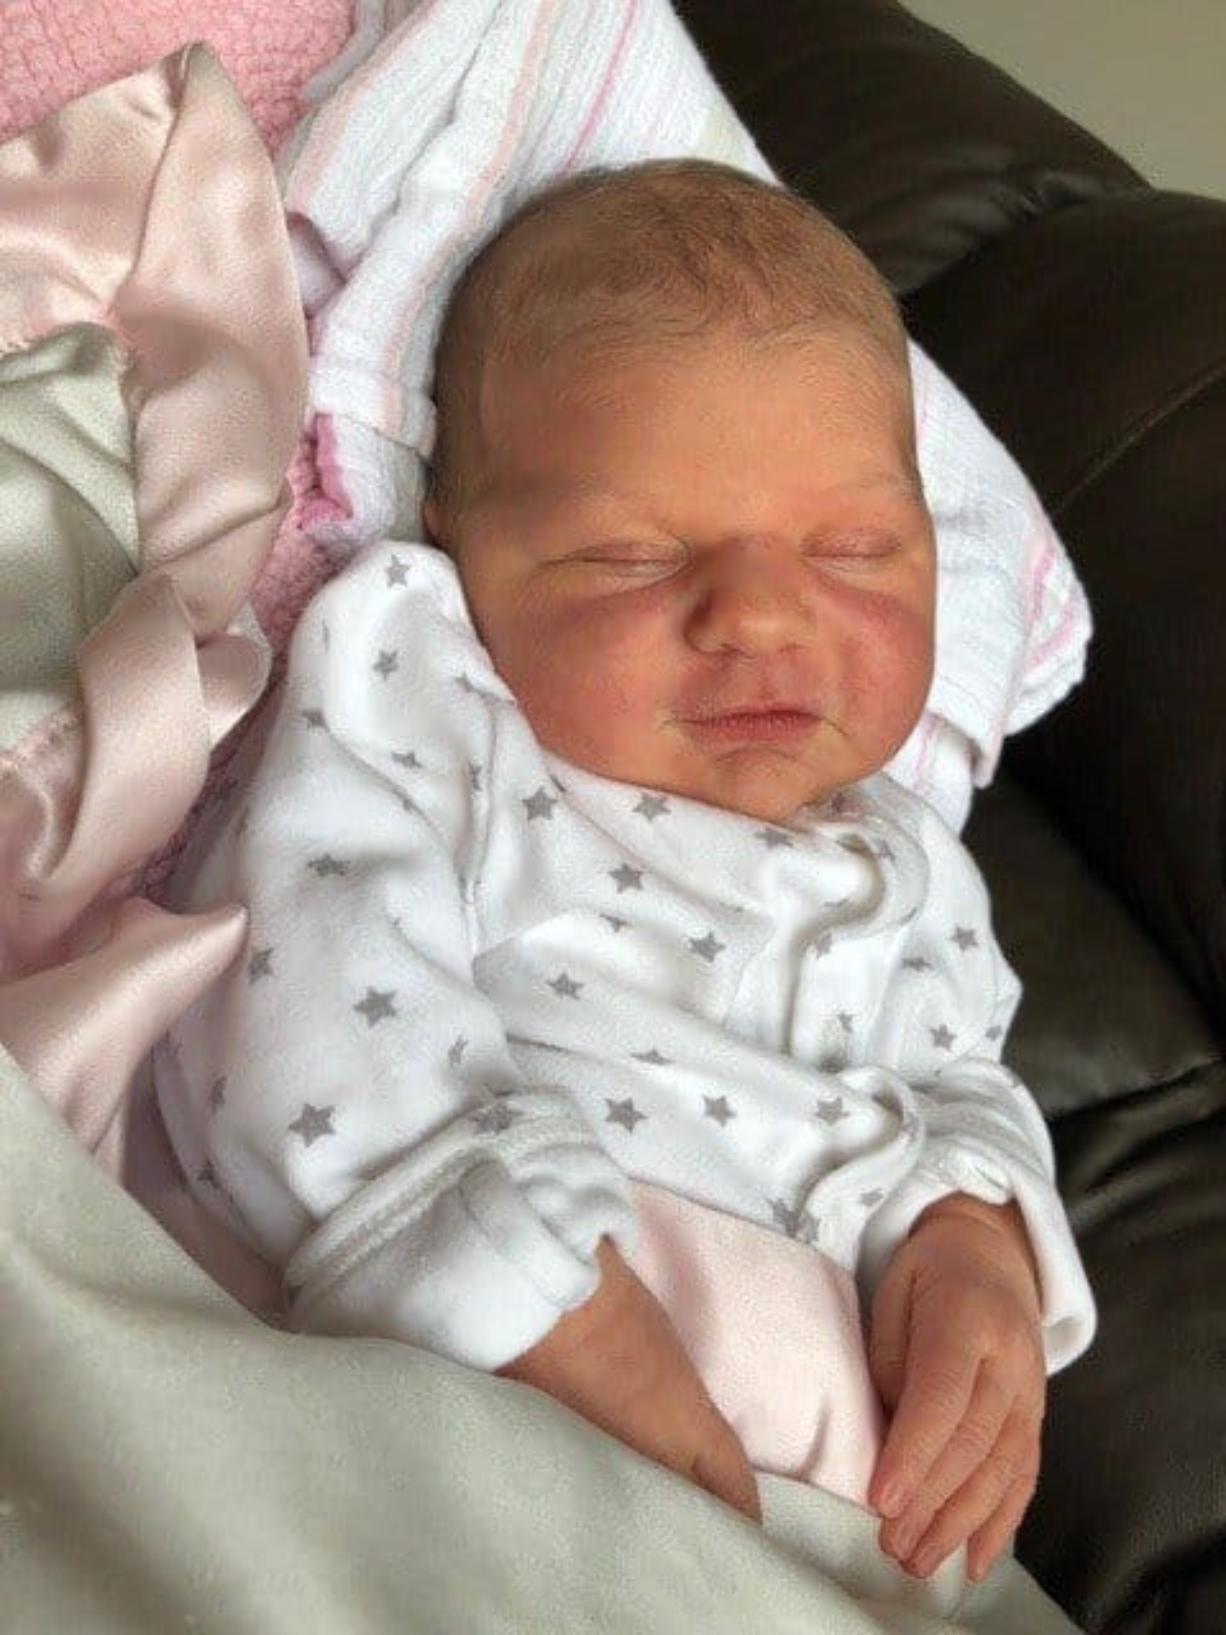 Isana Mae Beutler, the third child of Rep. Jaime Herrera Beutler and her husband, was born Tuesday morning. (Courtesy of Rep.